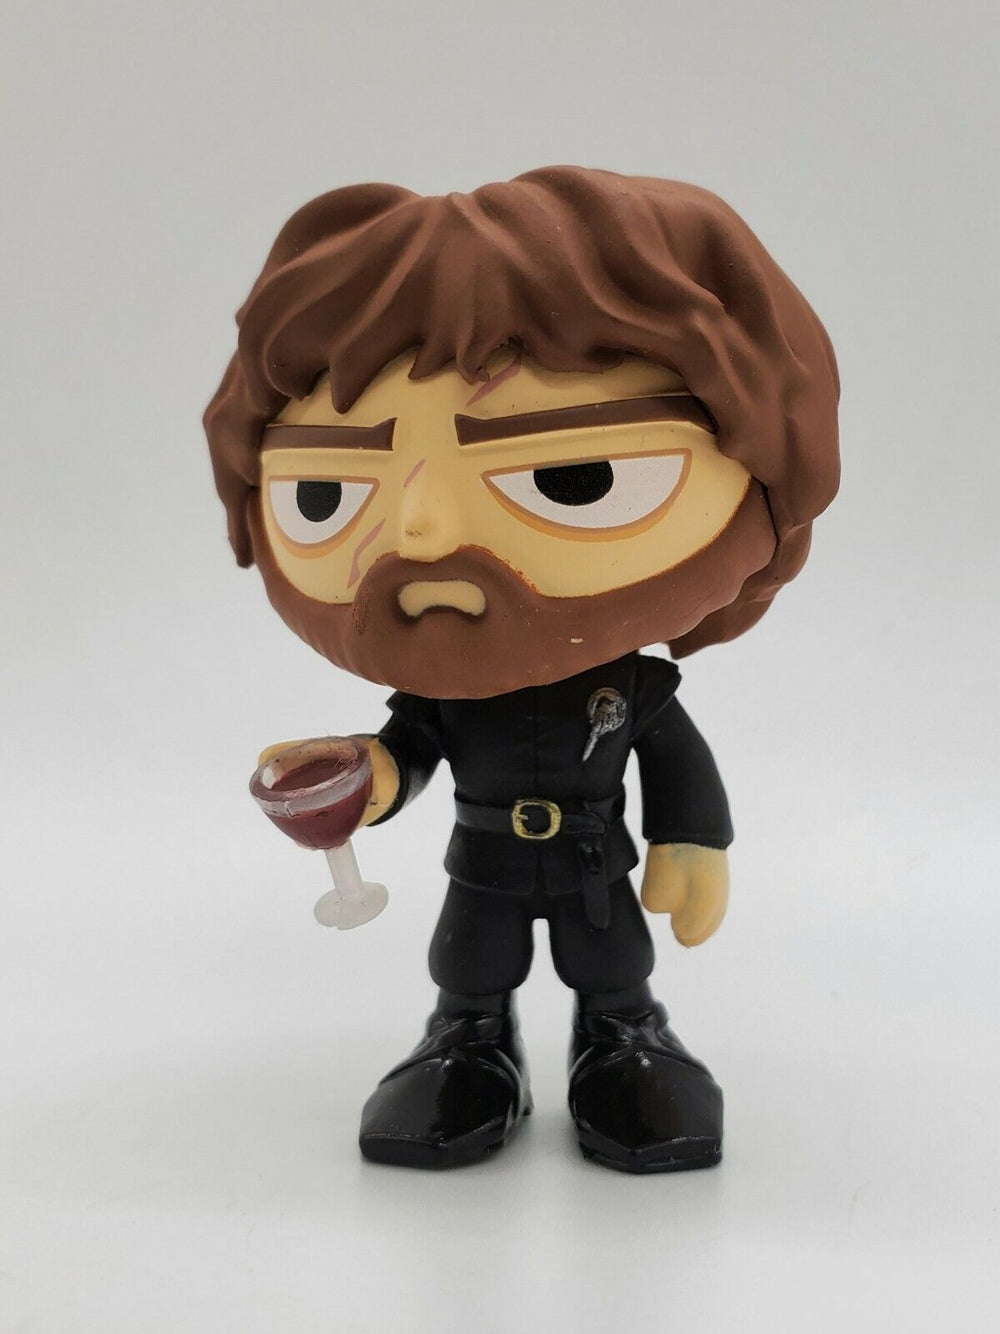 TYRION LANNISTER (DRAGONSTONE) (1/6) (SERIES 4) (GAME OF THRONES) FUNKO MYSTERY MINI